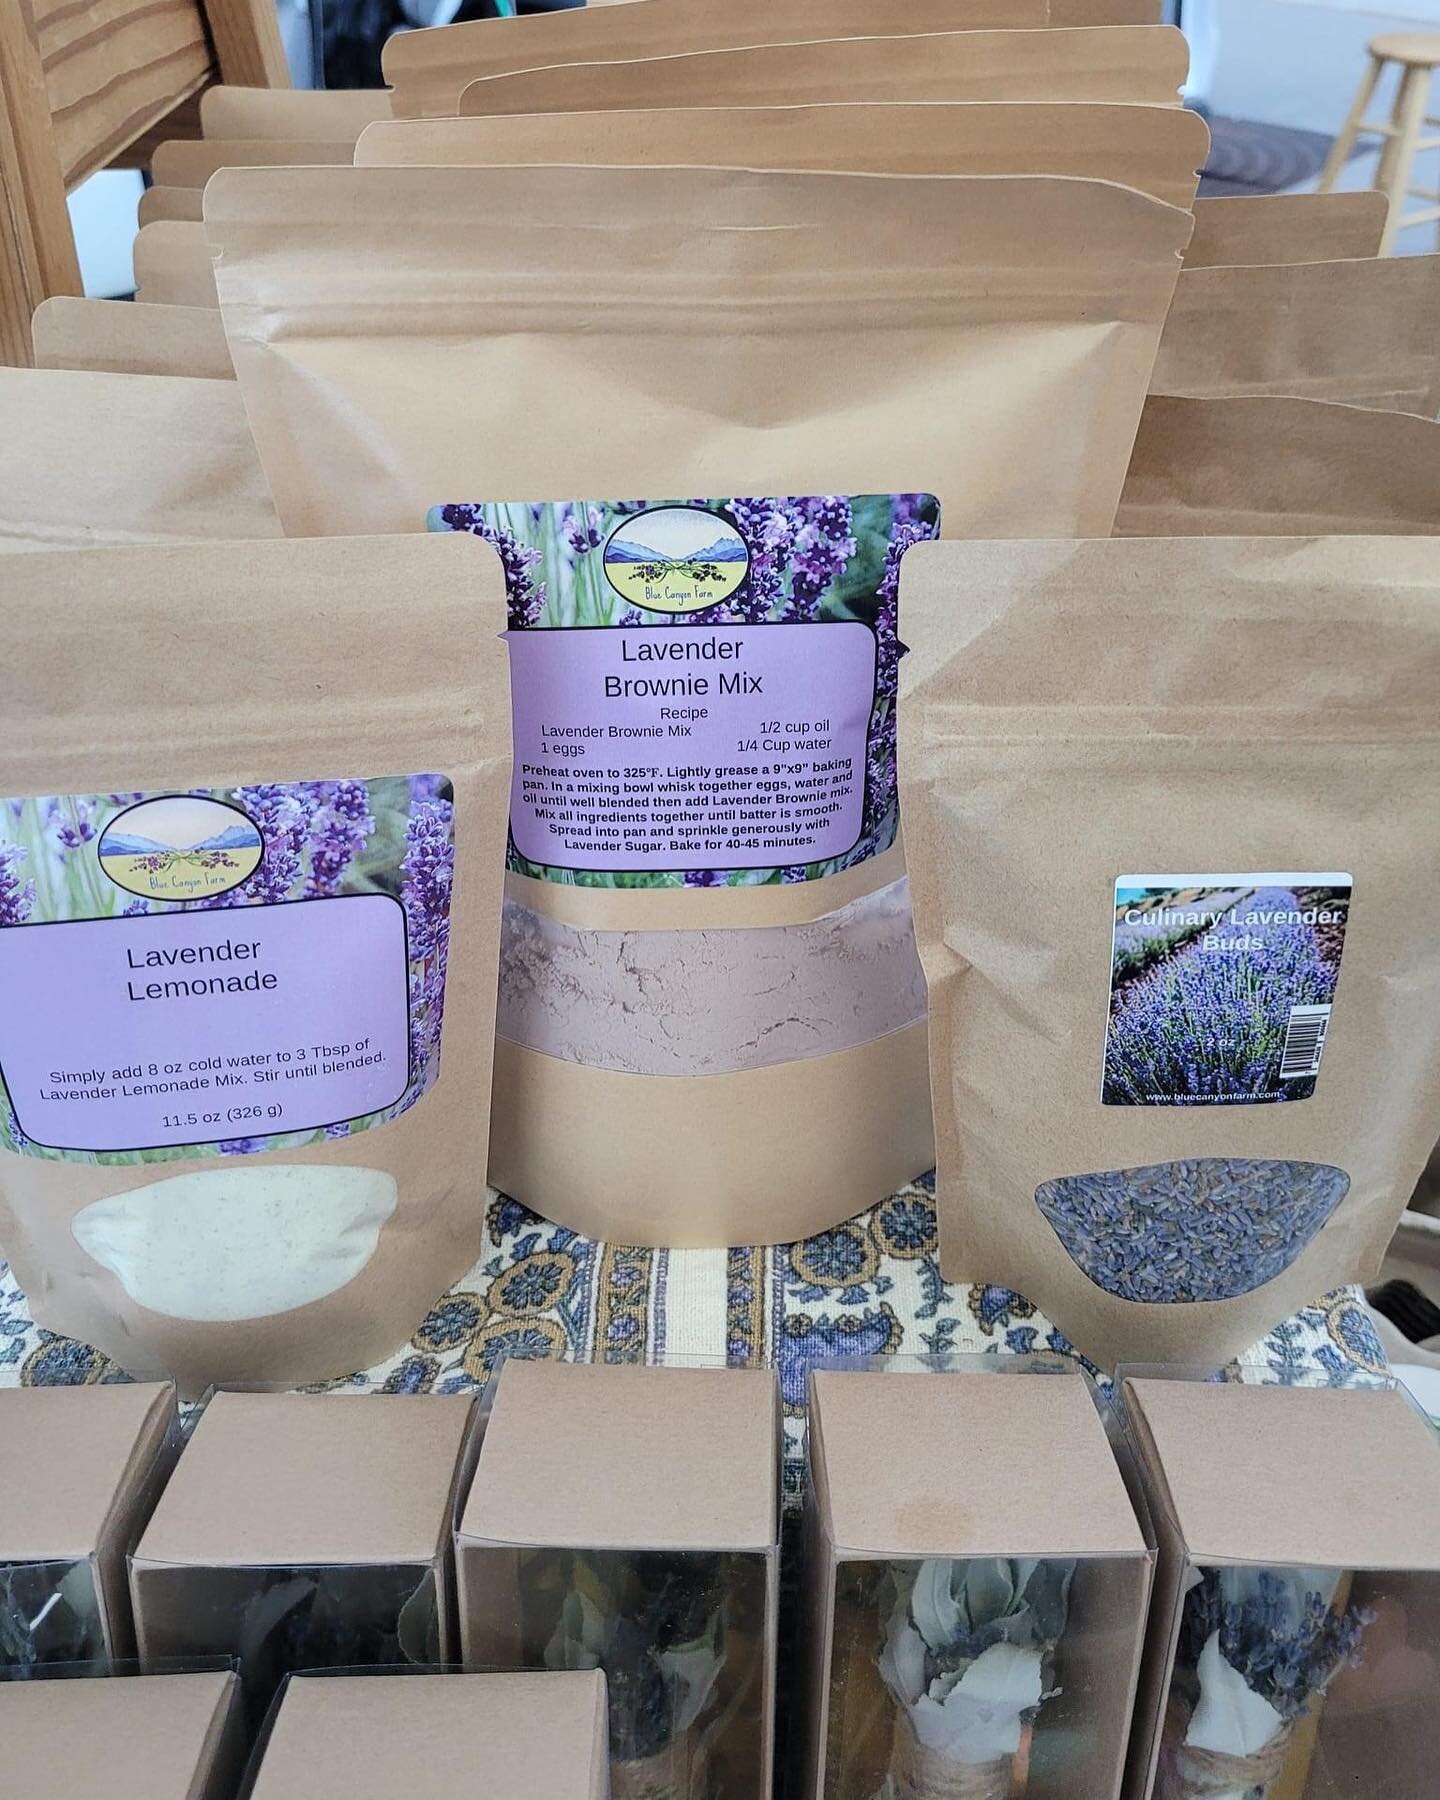 Good morning folks! Only one more market at Farmers Market Ogden after today! I came with our lavender brownie mix, along with our lemonade, it's gonna be another hot one! Only 3 wreaths for the rest if the season so grab em while you can.